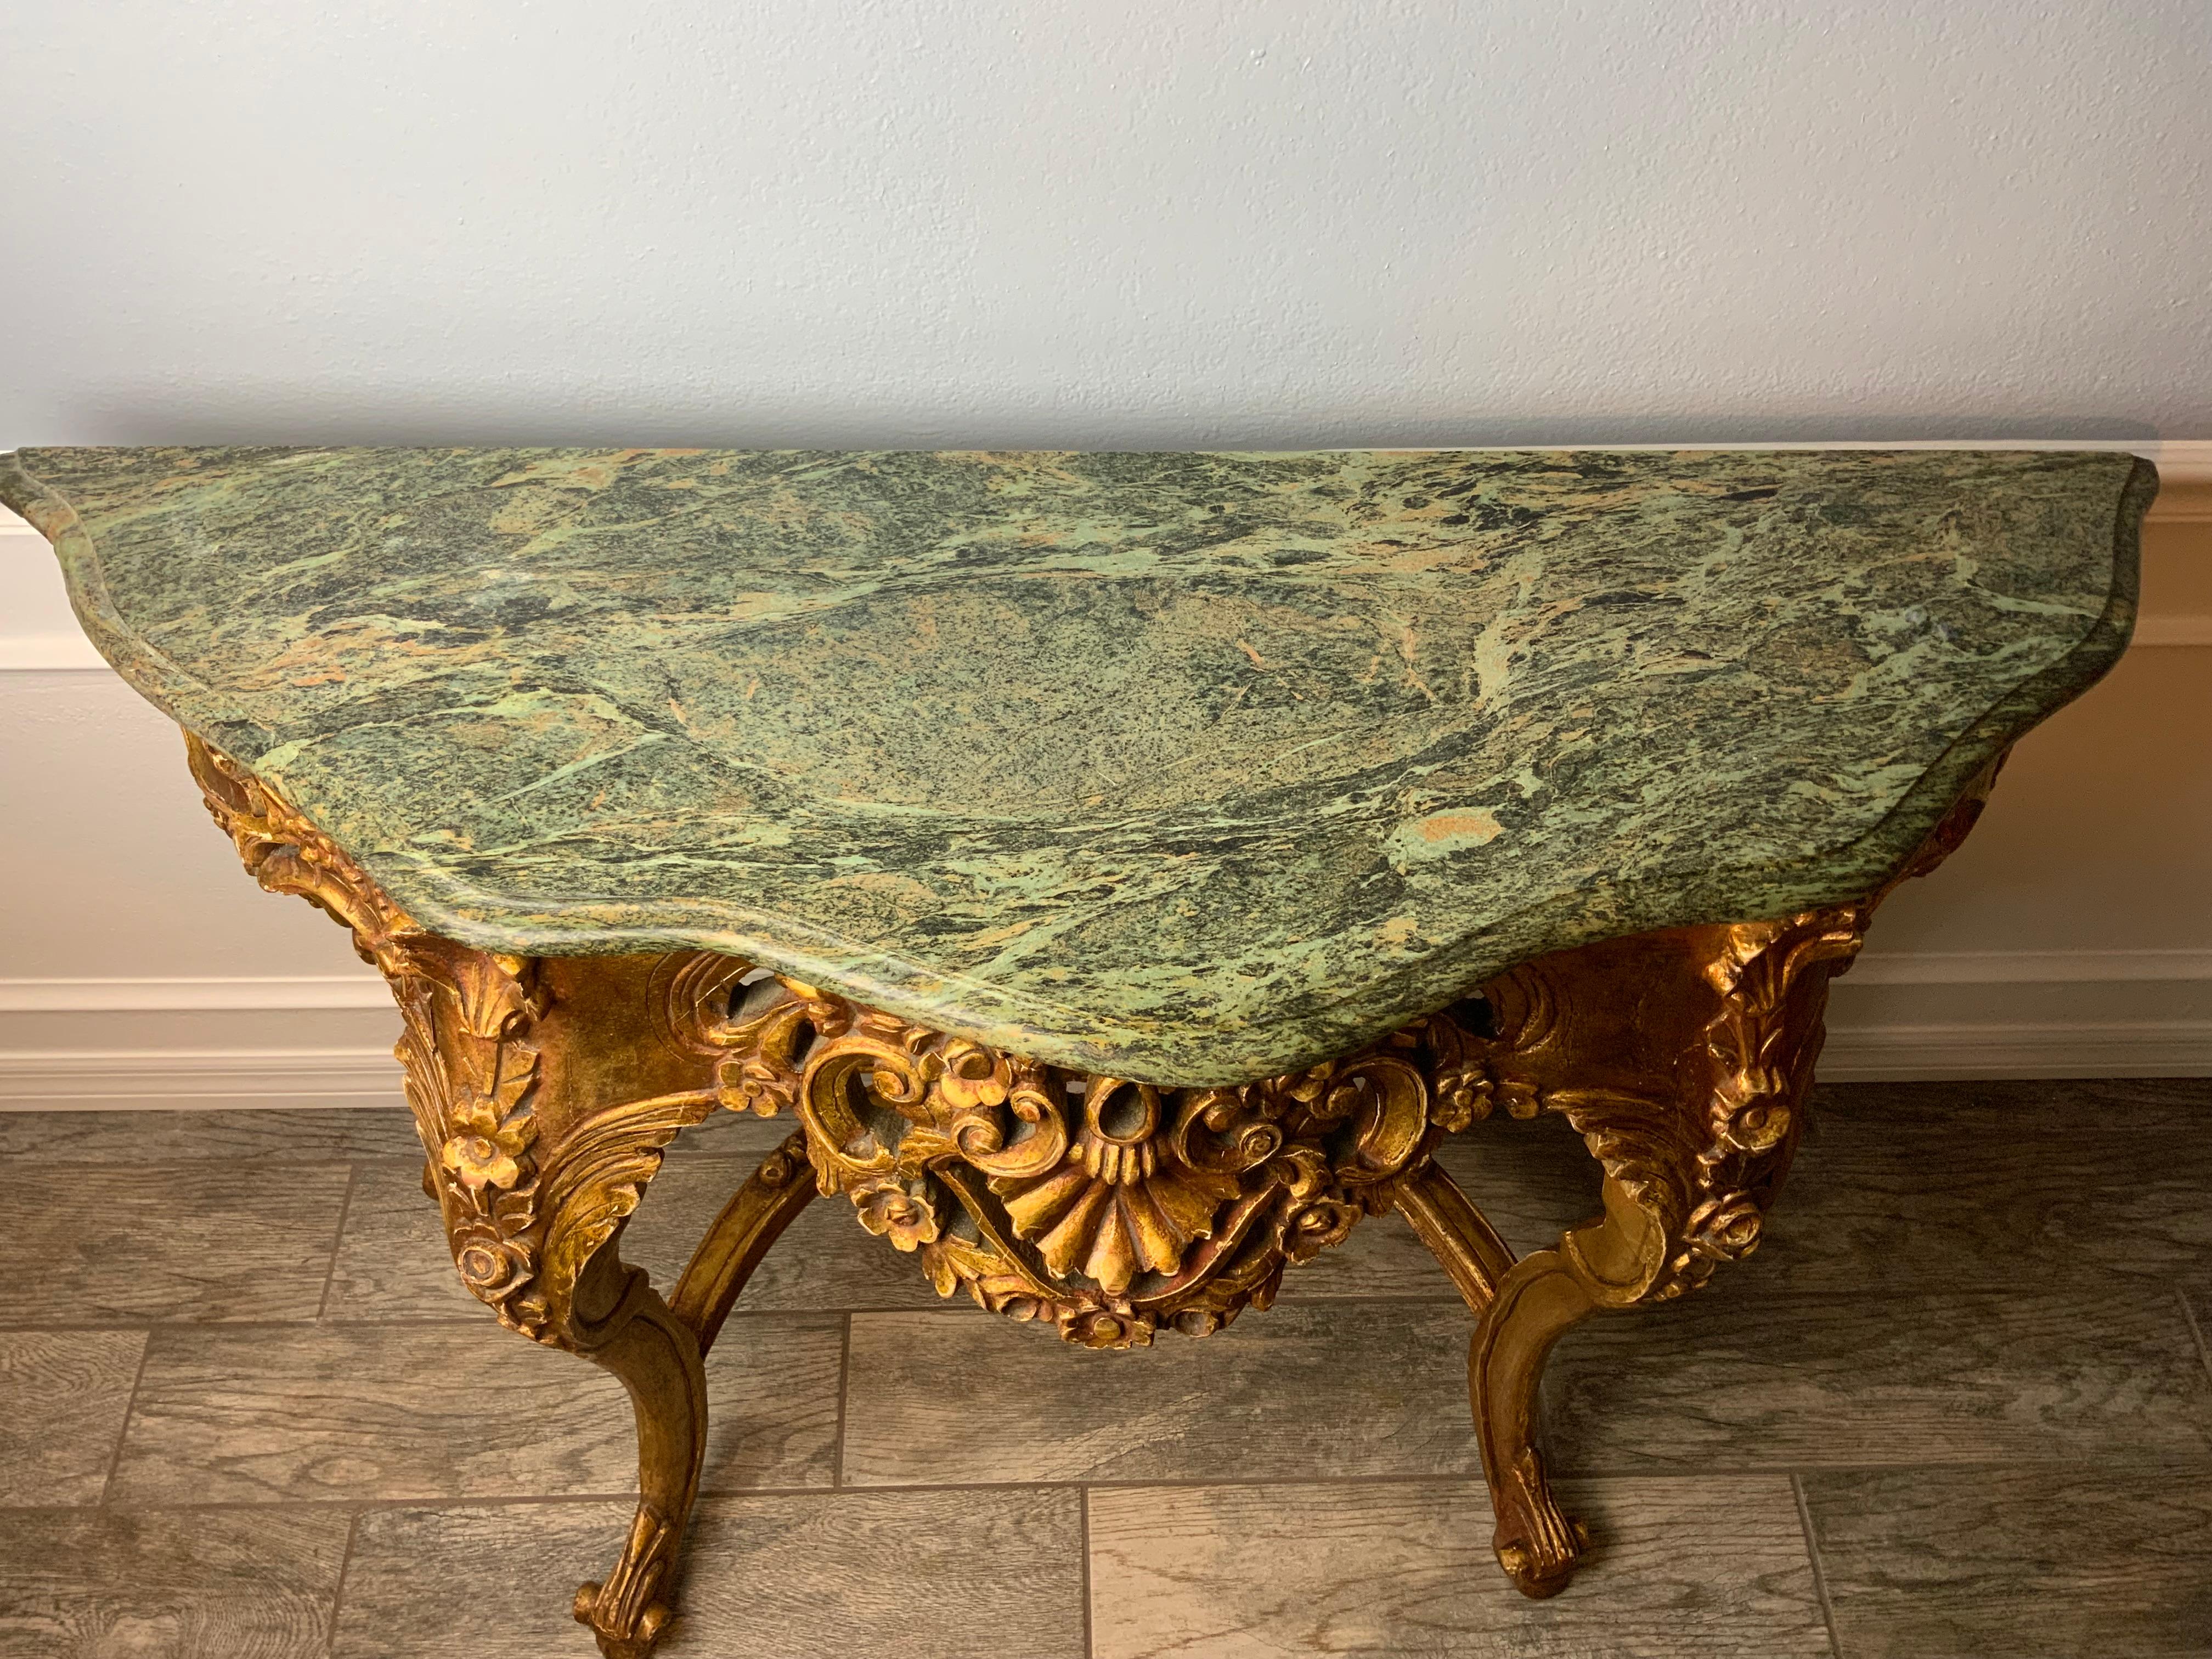 A very nice carved gilt console table probably from the early to mid-20th century. Great patina and color to the old surface. Beautiful Marble top with a molded ogee edge with different shades of greens and gold.